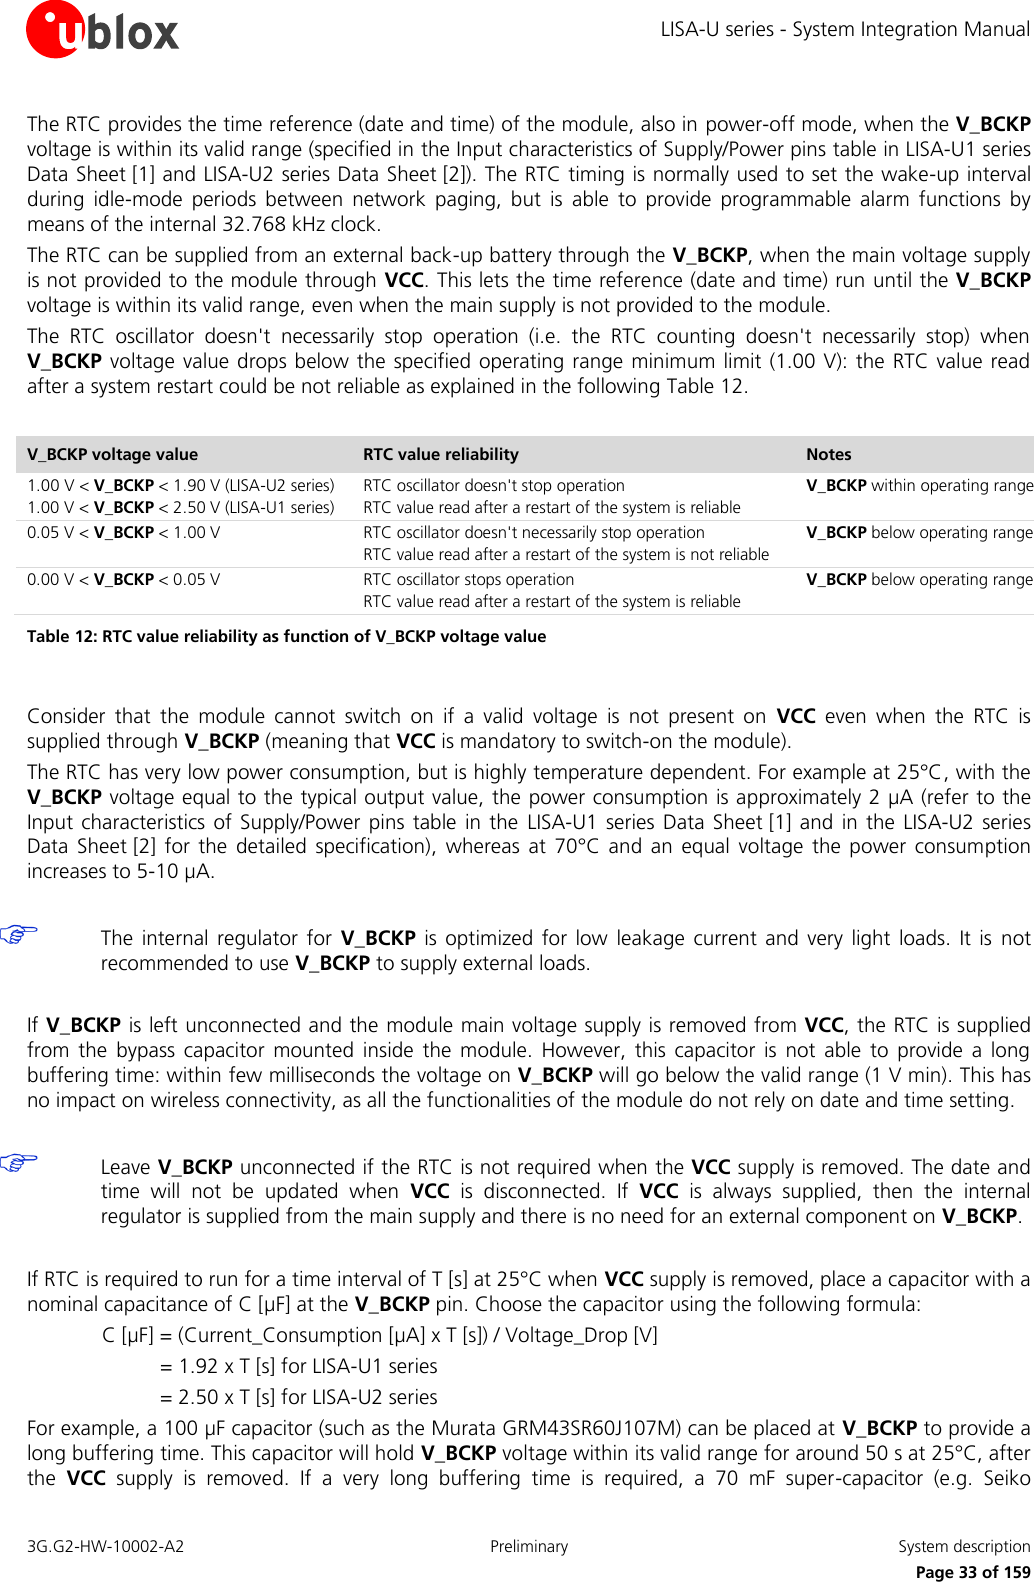 LISA-U series - System Integration Manual 3G.G2-HW-10002-A2  Preliminary  System description      Page 33 of 159 The RTC provides the time reference (date and time) of the module, also in power-off mode, when the V_BCKP voltage is within its valid range (specified in the Input characteristics of Supply/Power pins table in LISA-U1 series Data Sheet [1] and LISA-U2 series Data Sheet [2]). The RTC timing is normally used to set the wake-up interval during  idle-mode  periods  between  network  paging,  but  is  able  to  provide  programmable  alarm  functions  by means of the internal 32.768 kHz clock. The RTC can be supplied from an external back-up battery through the V_BCKP, when the main voltage supply is not provided to the module through VCC. This lets the time reference (date and time) run until the V_BCKP voltage is within its valid range, even when the main supply is not provided to the module. The  RTC  oscillator  doesn&apos;t  necessarily  stop  operation  (i.e.  the  RTC  counting  doesn&apos;t  necessarily  stop)  when V_BCKP voltage  value drops below the  specified  operating range minimum limit (1.00 V): the  RTC value read after a system restart could be not reliable as explained in the following Table 12.  V_BCKP voltage value RTC value reliability Notes 1.00 V &lt; V_BCKP &lt; 1.90 V (LISA-U2 series) 1.00 V &lt; V_BCKP &lt; 2.50 V (LISA-U1 series) RTC oscillator doesn&apos;t stop operation RTC value read after a restart of the system is reliable V_BCKP within operating range 0.05 V &lt; V_BCKP &lt; 1.00 V RTC oscillator doesn&apos;t necessarily stop operation RTC value read after a restart of the system is not reliable V_BCKP below operating range 0.00 V &lt; V_BCKP &lt; 0.05 V RTC oscillator stops operation RTC value read after a restart of the system is reliable V_BCKP below operating range Table 12: RTC value reliability as function of V_BCKP voltage value  Consider  that  the  module  cannot  switch  on  if  a  valid  voltage  is  not  present  on  VCC  even  when  the  RTC  is supplied through V_BCKP (meaning that VCC is mandatory to switch-on the module). The RTC has very low power consumption, but is highly temperature dependent. For example at 25°C, with the V_BCKP voltage equal to the typical output value, the power consumption is approximately 2 µA (refer to the Input characteristics of Supply/Power  pins table  in the  LISA-U1  series  Data  Sheet [1] and  in the  LISA-U2  series Data  Sheet [2]  for  the  detailed  specification),  whereas  at  70°C  and an  equal  voltage  the power  consumption increases to 5-10 µA.   The  internal  regulator  for  V_BCKP is  optimized  for low  leakage  current  and very  light loads.  It is  not recommended to use V_BCKP to supply external loads.  If V_BCKP is left unconnected and the module main voltage supply is removed from VCC, the RTC is supplied from  the  bypass  capacitor  mounted  inside  the  module.  However,  this  capacitor  is  not  able  to  provide  a  long buffering time: within few milliseconds the voltage on V_BCKP will go below the valid range (1 V min). This has no impact on wireless connectivity, as all the functionalities of the module do not rely on date and time setting.   Leave V_BCKP unconnected if the RTC is not required when the VCC supply is removed. The date and time  will  not  be  updated  when  VCC  is  disconnected.  If  VCC  is  always  supplied,  then  the  internal regulator is supplied from the main supply and there is no need for an external component on V_BCKP.  If RTC is required to run for a time interval of T [s] at 25°C when VCC supply is removed, place a capacitor with a nominal capacitance of C [µF] at the V_BCKP pin. Choose the capacitor using the following formula: C [µF] = (Current_Consumption [µA] x T [s]) / Voltage_Drop [V] = 1.92 x T [s] for LISA-U1 series  = 2.50 x T [s] for LISA-U2 series  For example, a 100 µF capacitor (such as the Murata GRM43SR60J107M) can be placed at V_BCKP to provide a long buffering time. This capacitor will hold V_BCKP voltage within its valid range for around 50 s at 25°C, after the  VCC  supply  is  removed.  If  a  very  long  buffering  time  is  required,  a  70  mF  super-capacitor  (e.g.  Seiko 